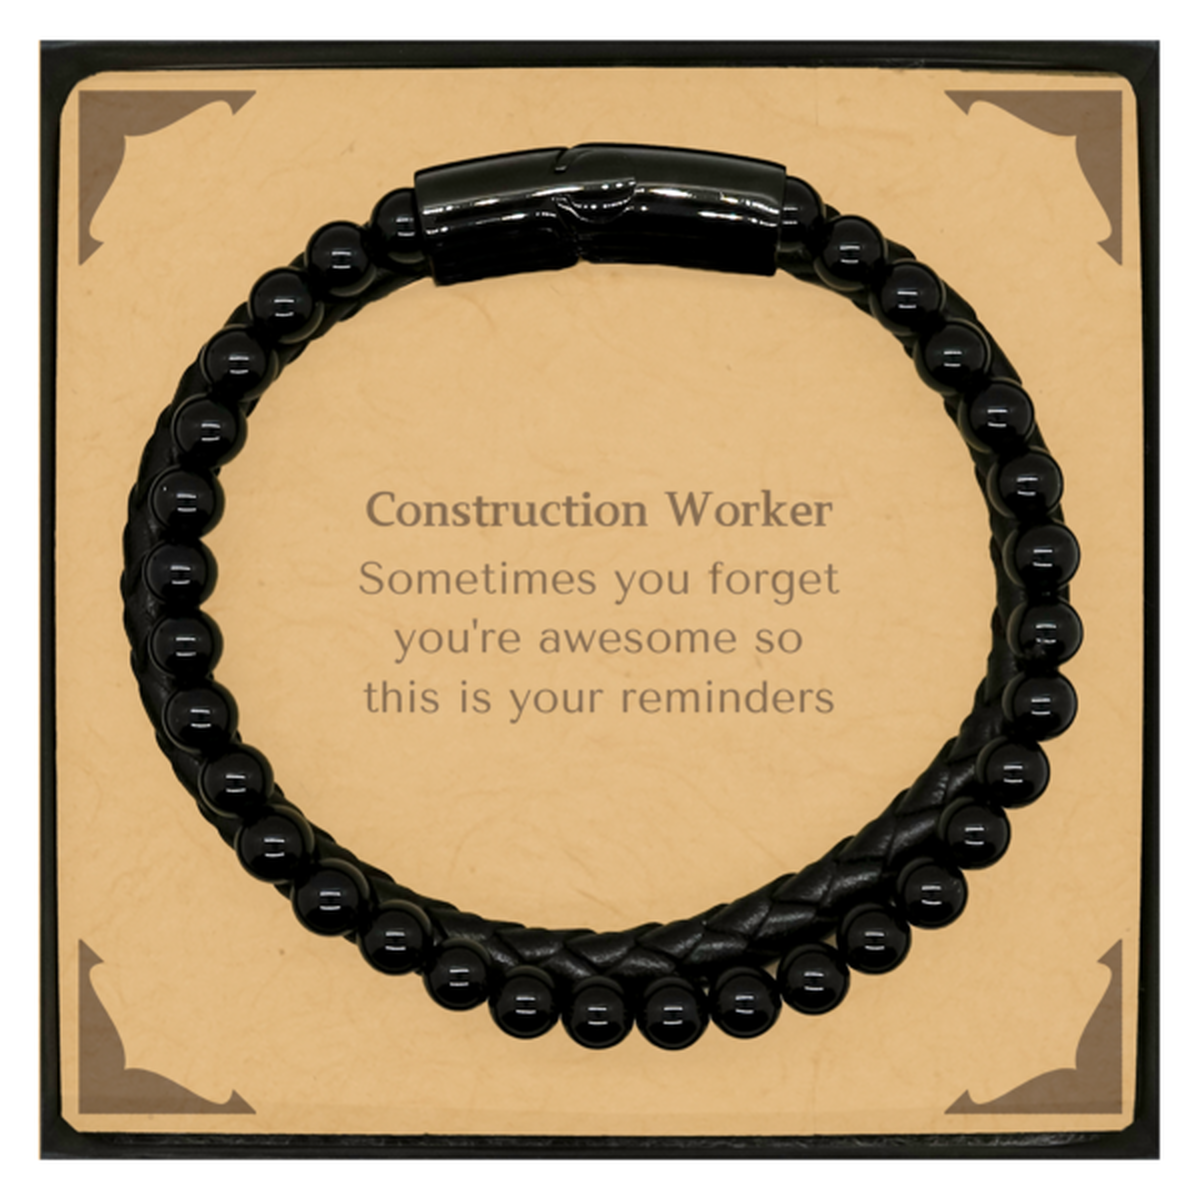 Sentimental Construction Worker Stone Leather Bracelets, Construction Worker Sometimes you forget you're awesome so this is your reminders, Graduation Christmas Birthday Gifts for Construction Worker, Men, Women, Coworkers